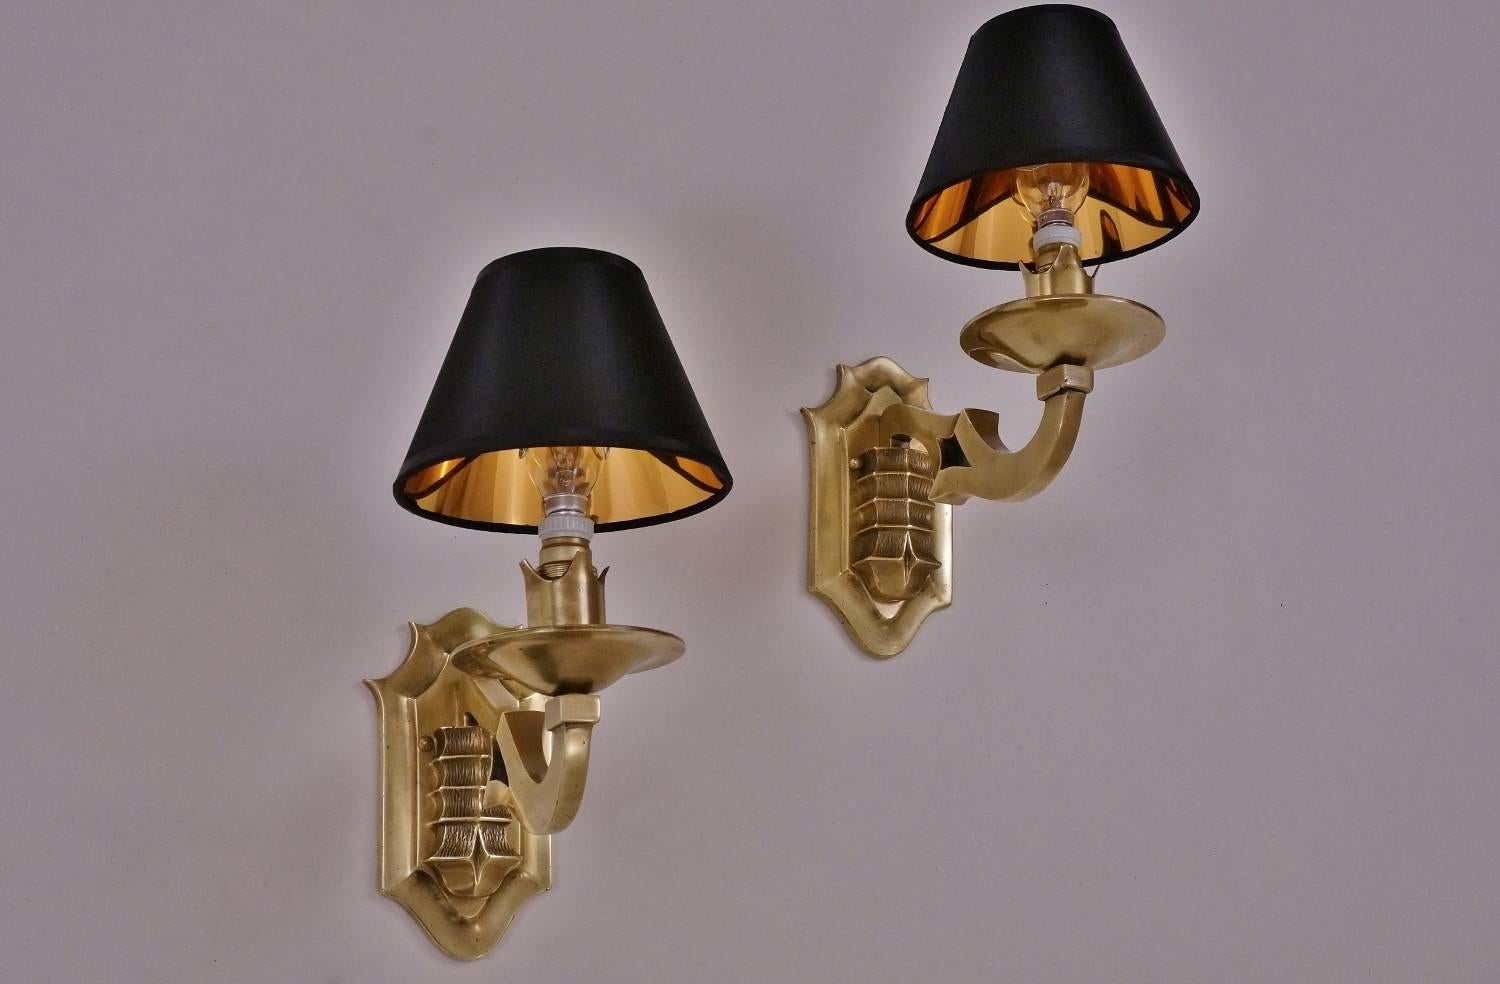 Maison Baguès wall lights, quality bronze casting in the chinoiserie style, circa 1970s, French.

Thoroughly cleaned, fully rewired, in full working order and ready to use. Light bulbs included.

These quality cast bronze wall lights have a